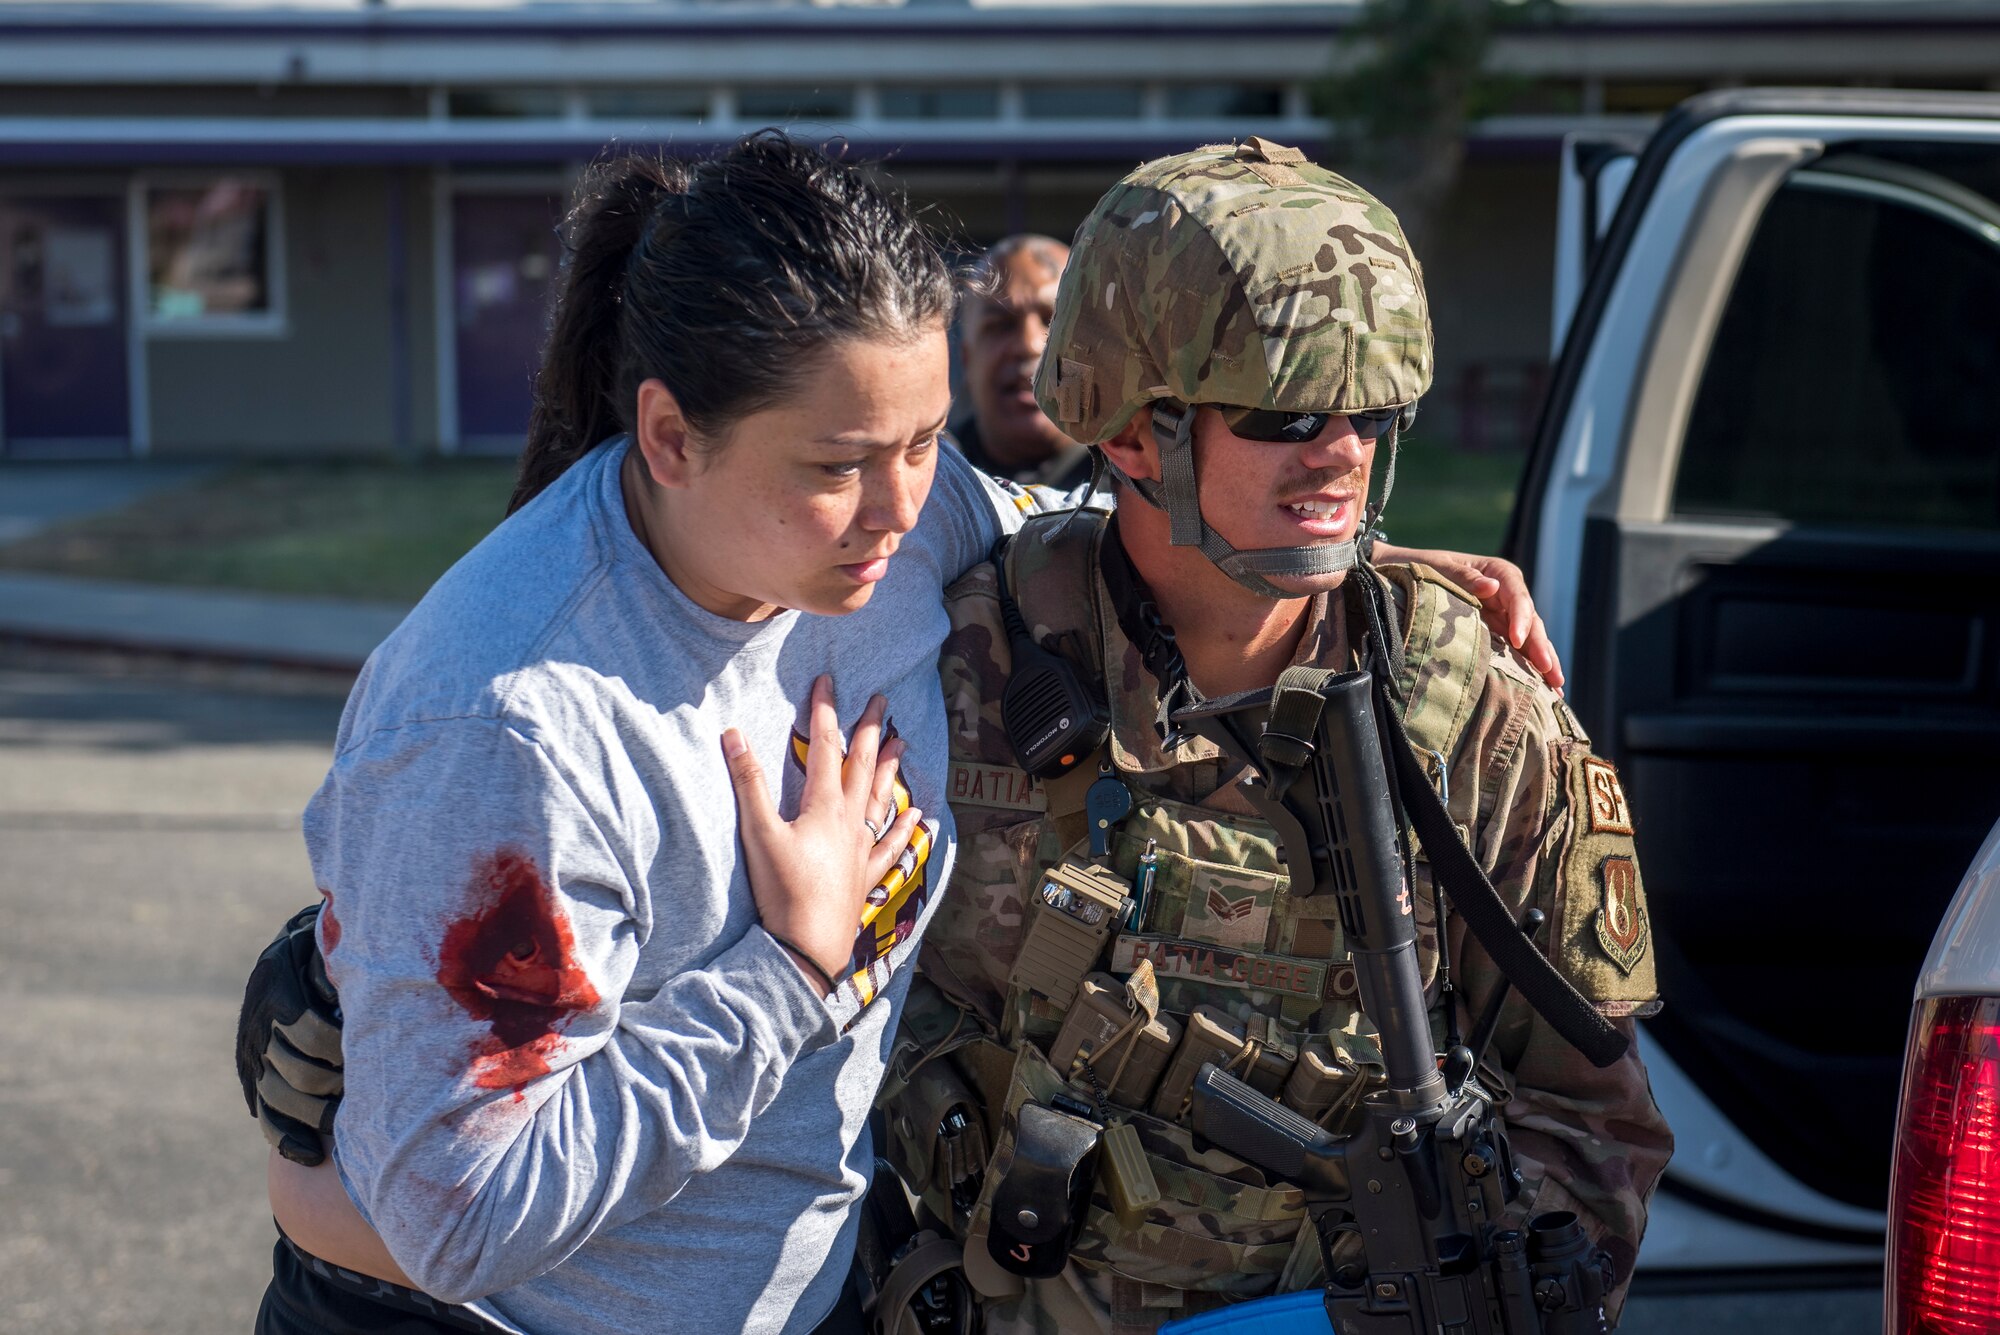 Senior Airman Timothy Batia-Gore, 412th Security Forces Squadron, escorts a shooting “victim” to safety during an active-shooter exercise at Edwards Air Force Base, California, Aug. 9. (U.S. Air Force photo by Richard Gonzales)